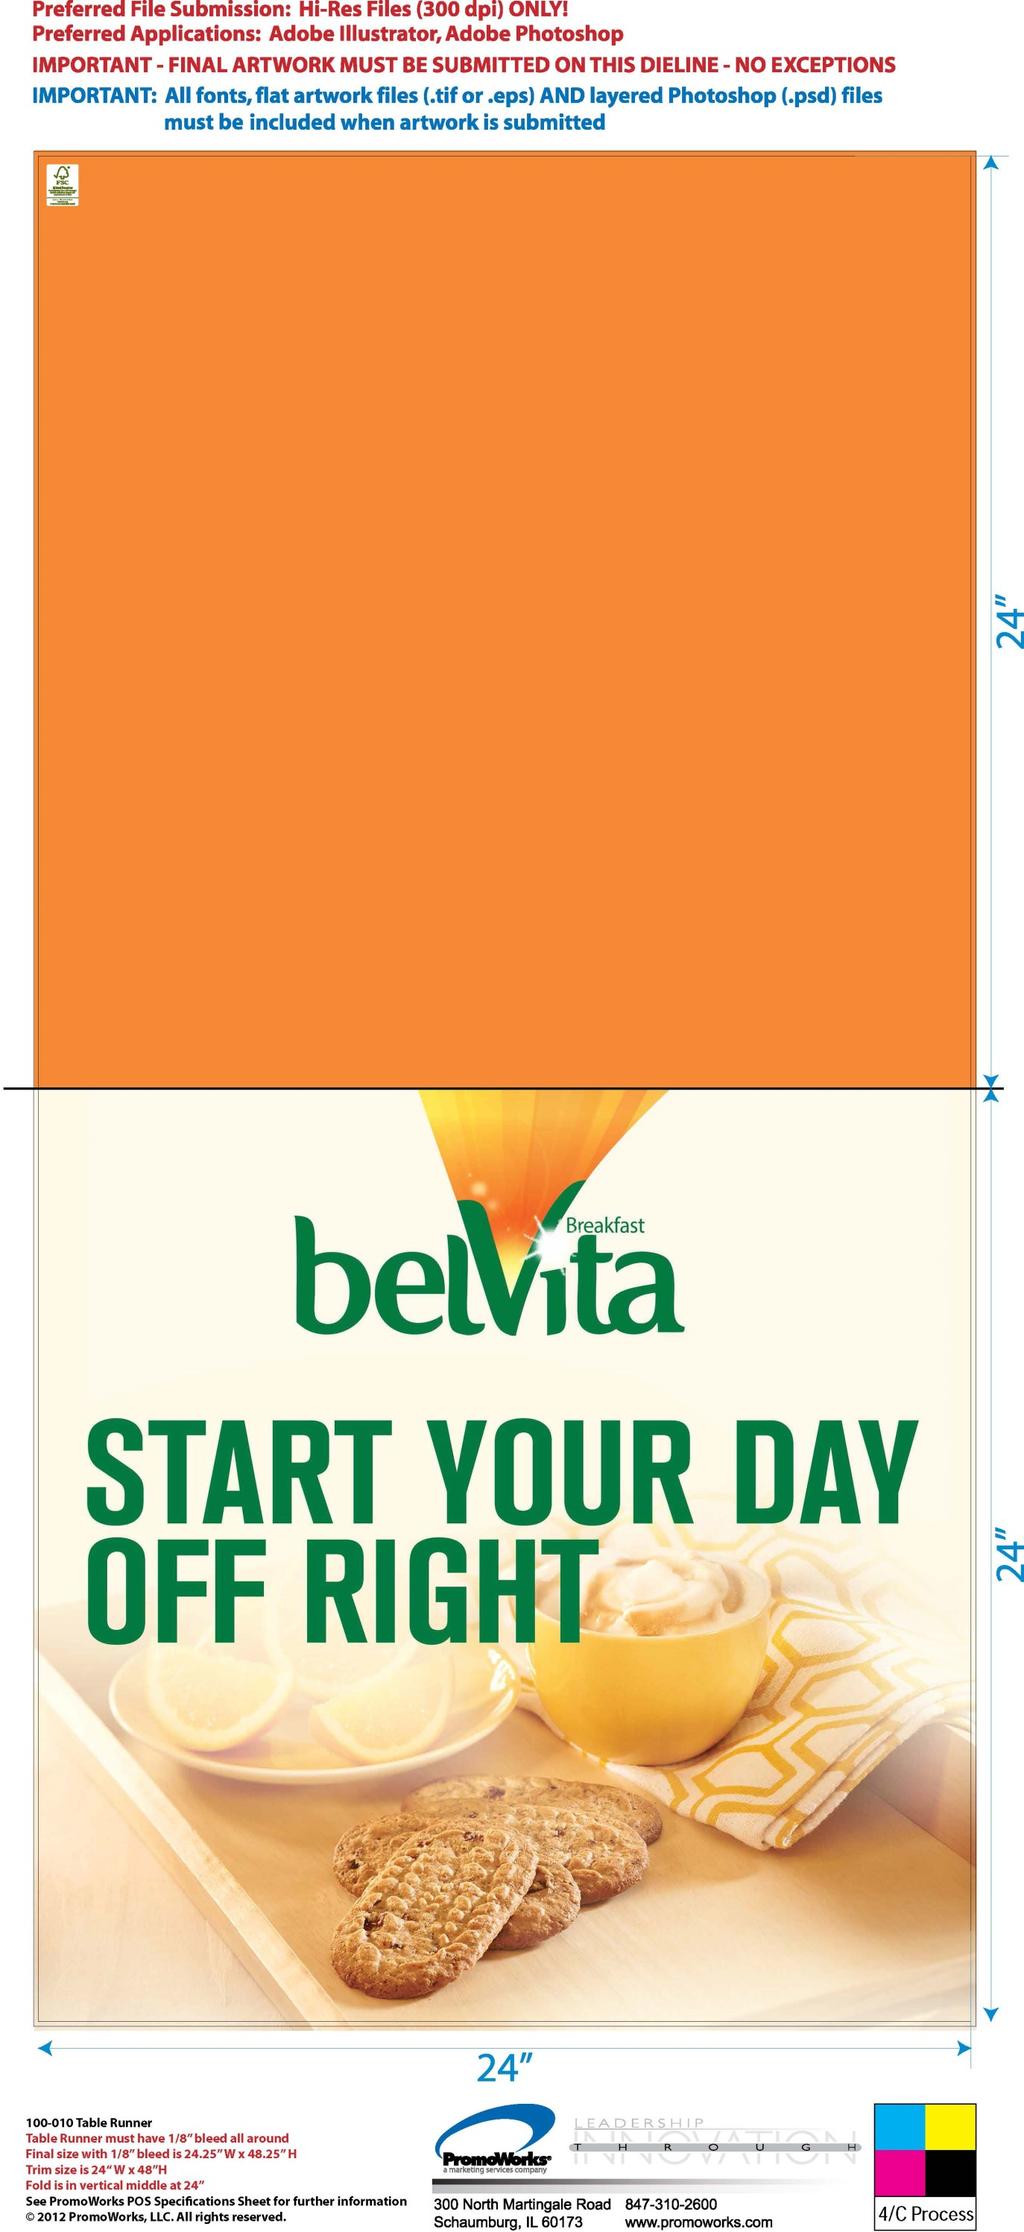 Post Event: Return any left over belvita Breakfast Biscuits product from your table display to the shelf. DO NOT take sample product out of the store.